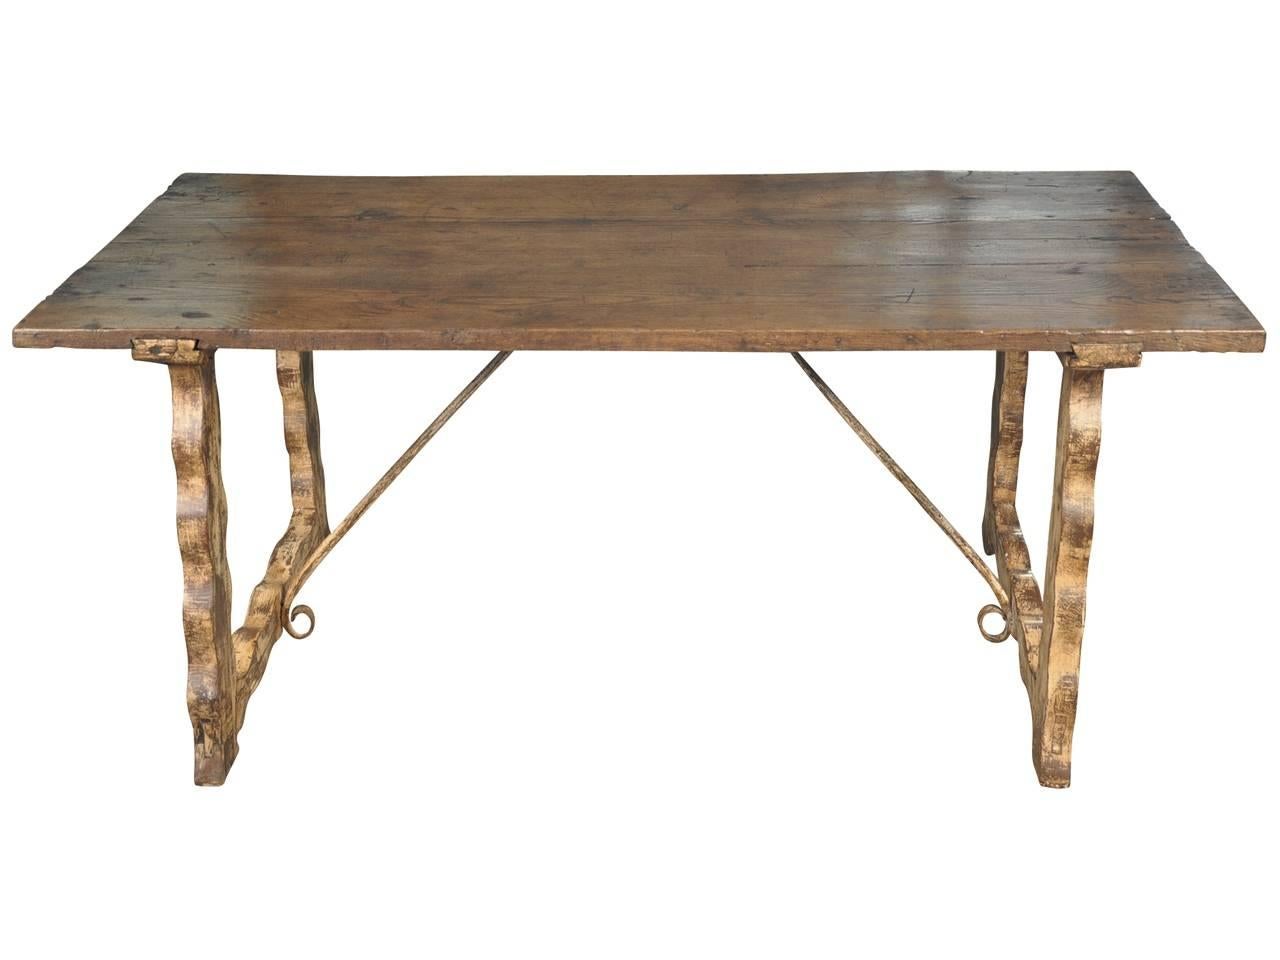 A charming and primitive farm table from Portugal. Soundly constructed from chestnut with iron stretchers. The classical lyre shaped legs and stretchers have a scraped painted finish. A wonderful piece as a breakfast table, small dining table or